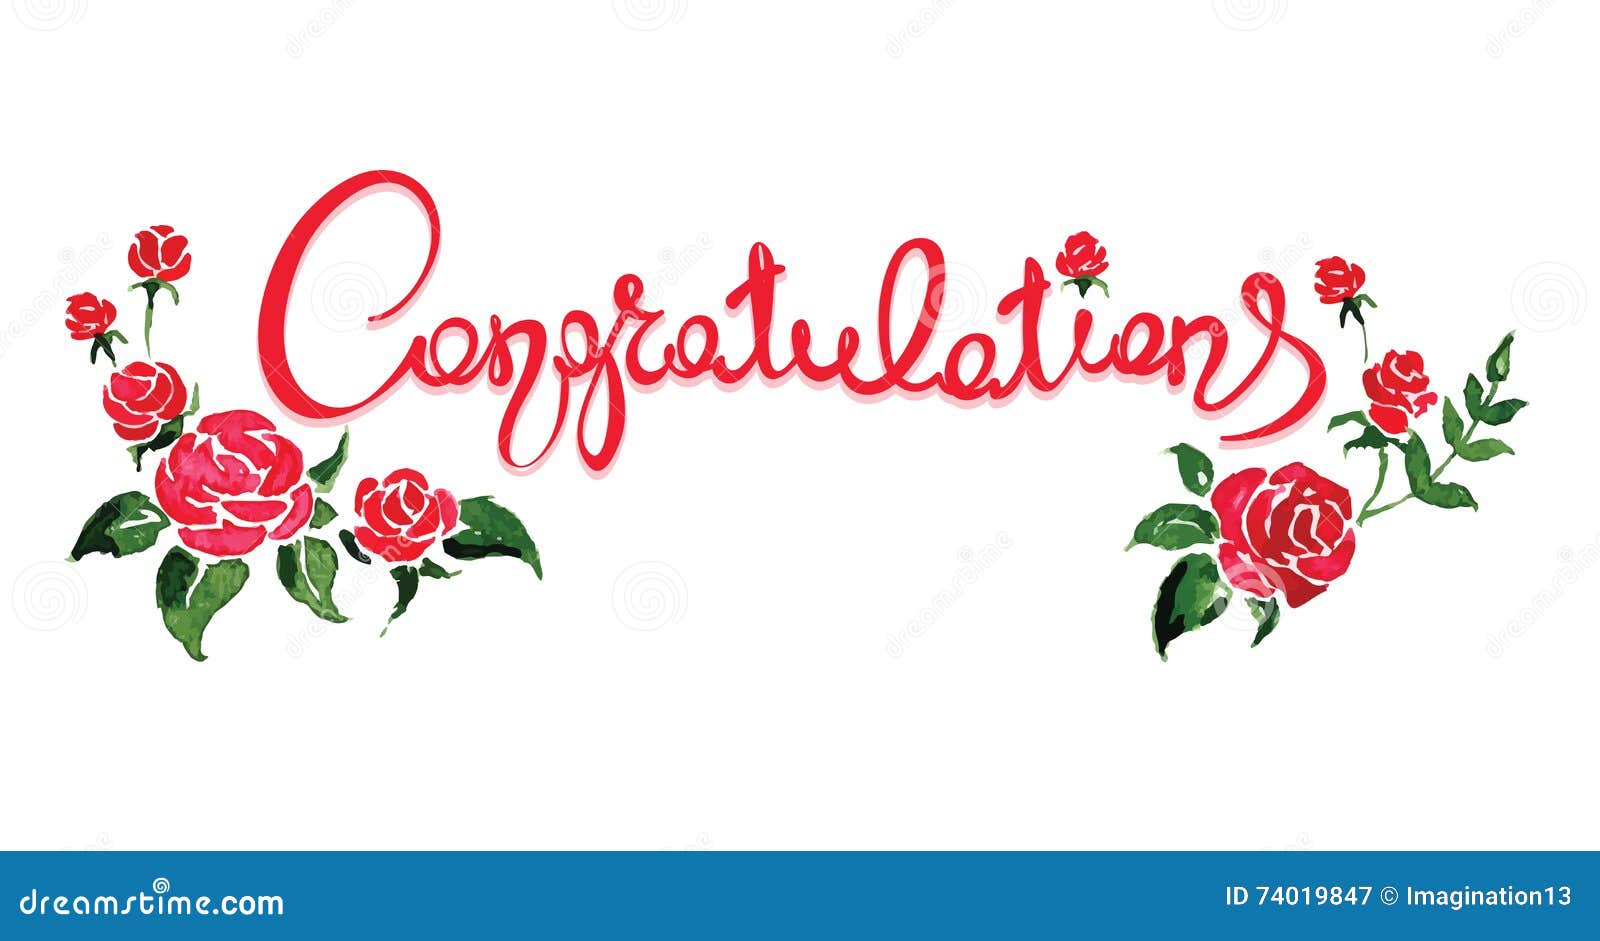 Congratulations with Flowers Stock Vector - Illustration of event ...